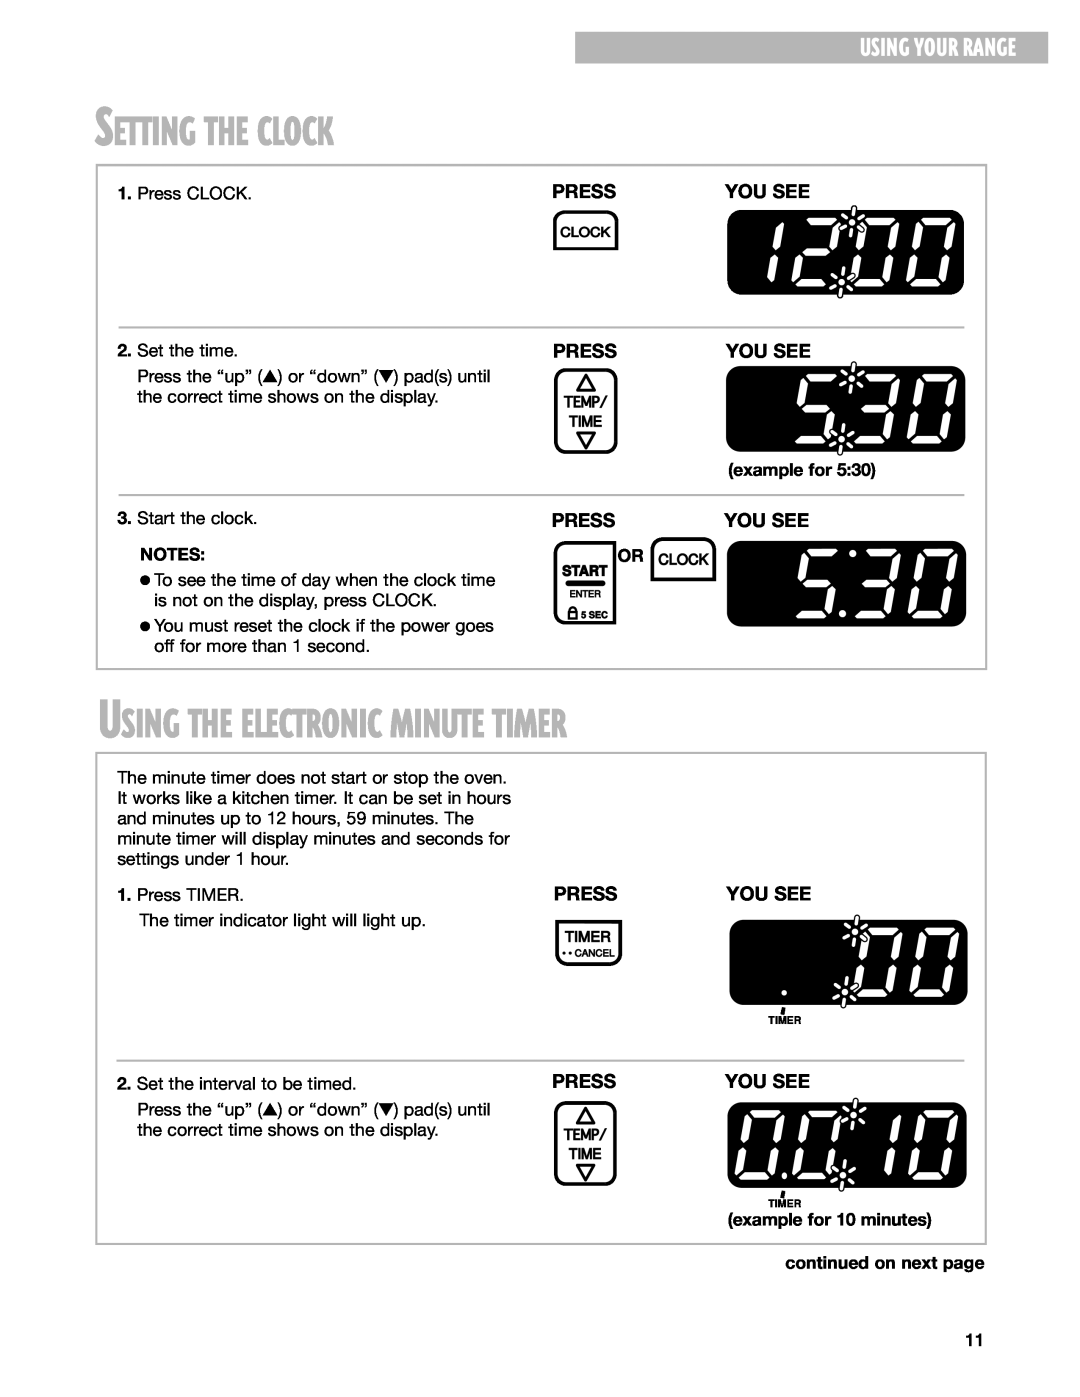 Whirlpool SGS375H warranty Setting The Clock, Using The Electronic Minute Timer, Using Your Range, You See, Press CLOCK 